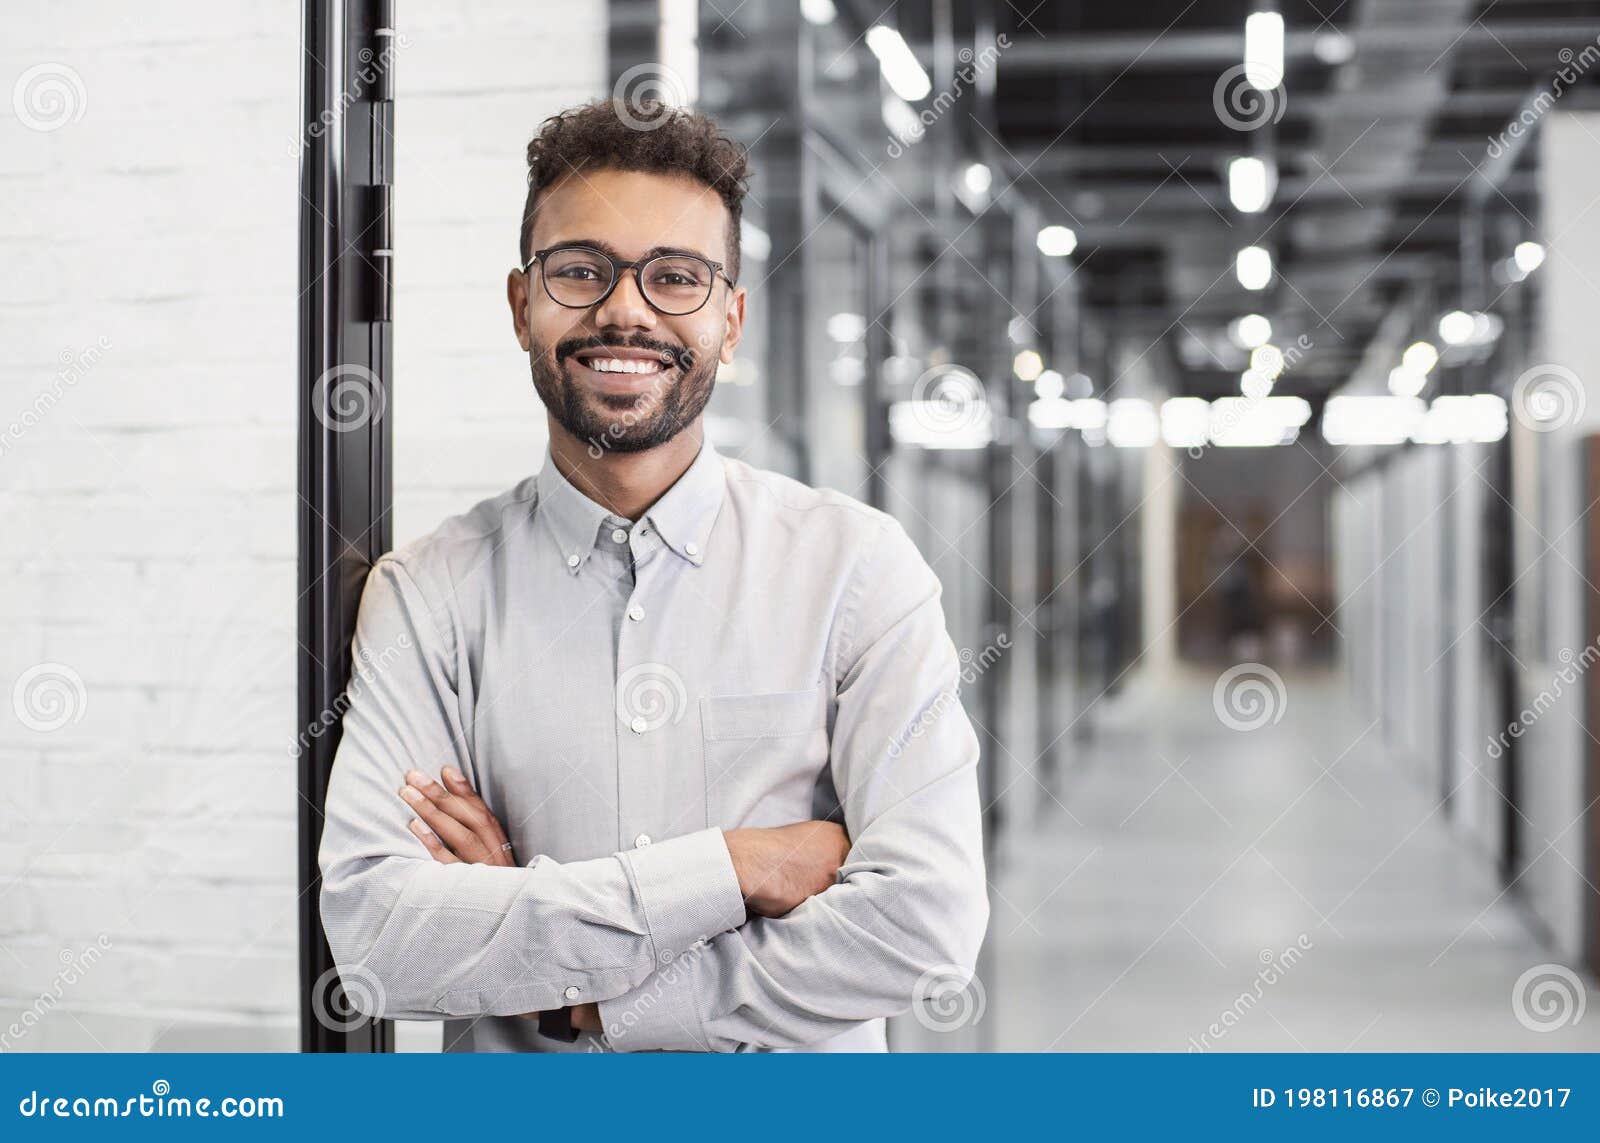 handsome young businessman portrait. cheerful self confident smiling man with crossed hands in office